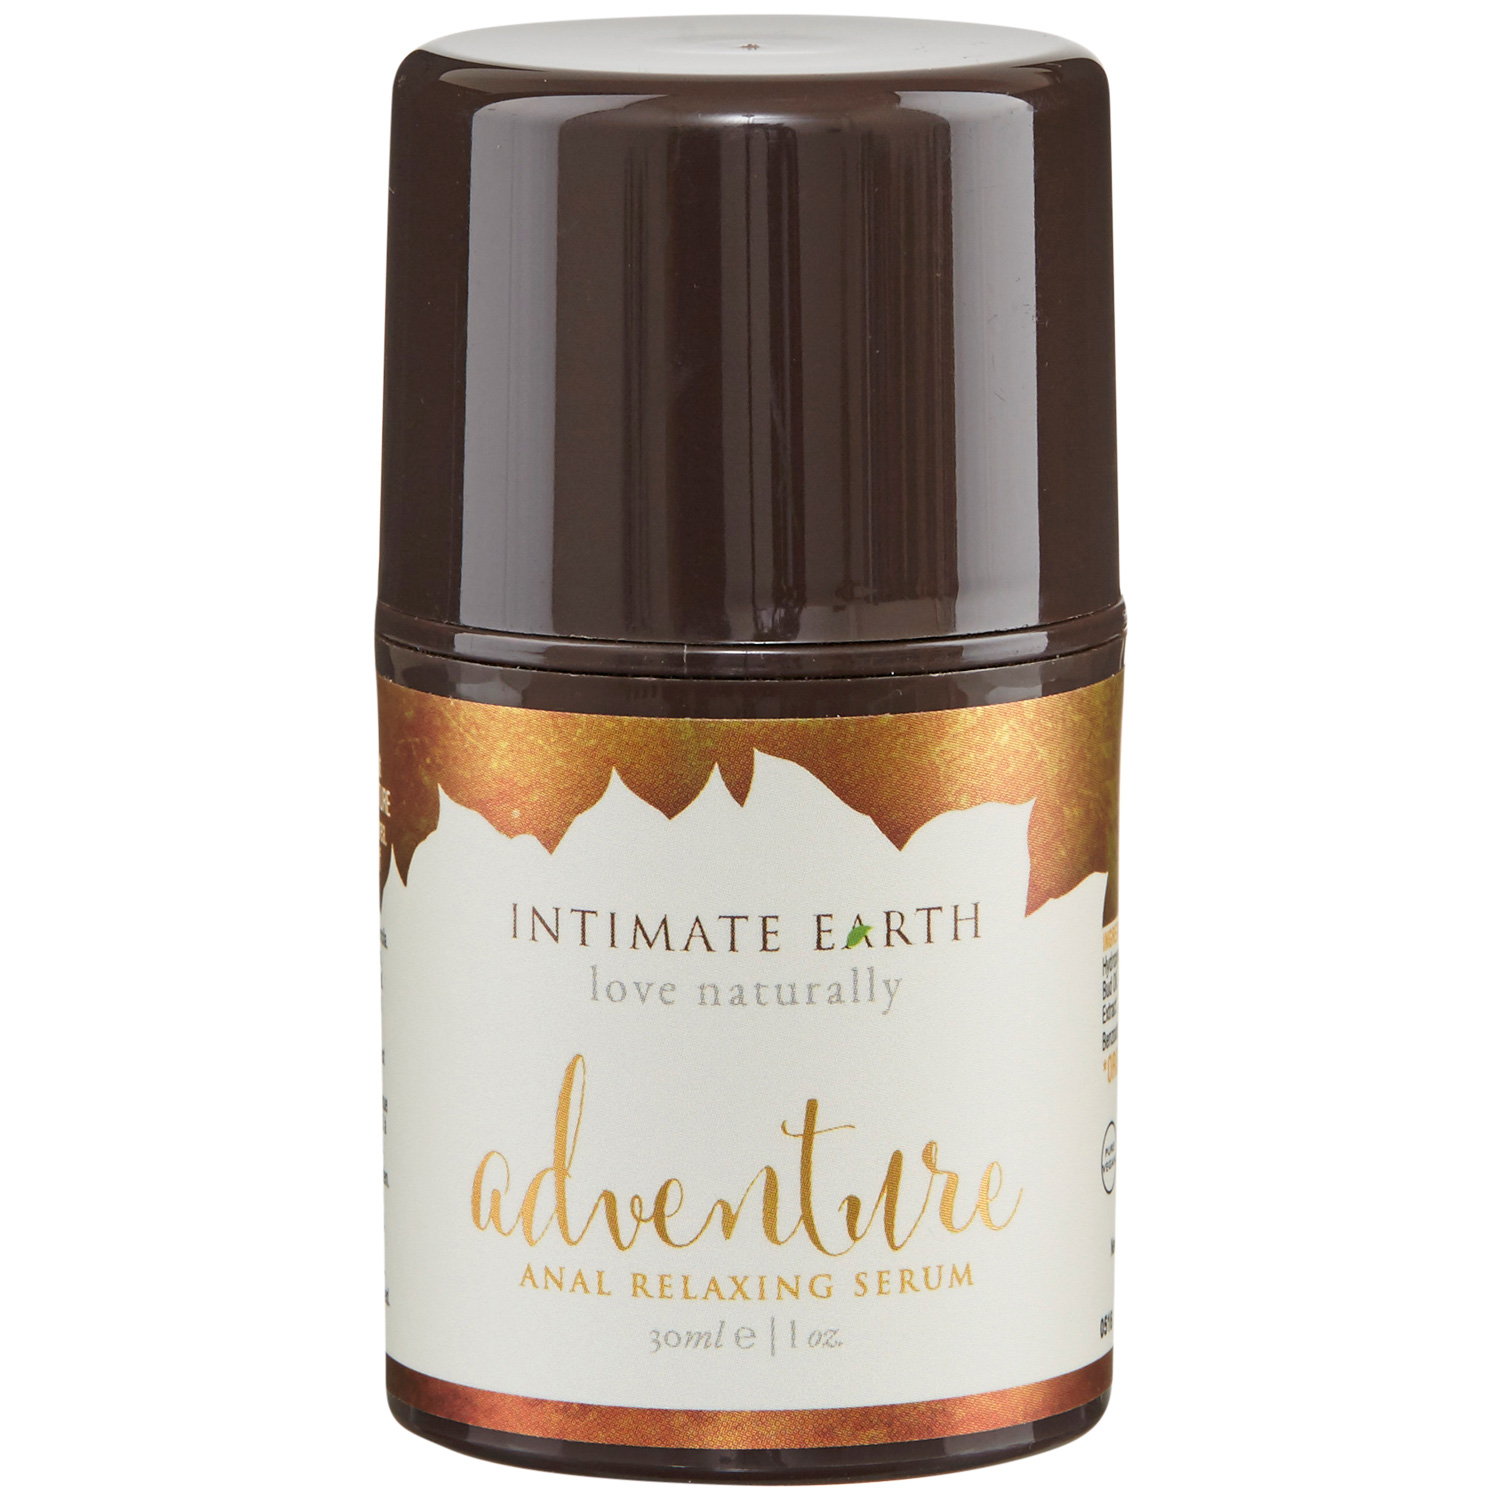 Intimate Earth Adventure Anal Relaxing Serum 30 ml - Clear